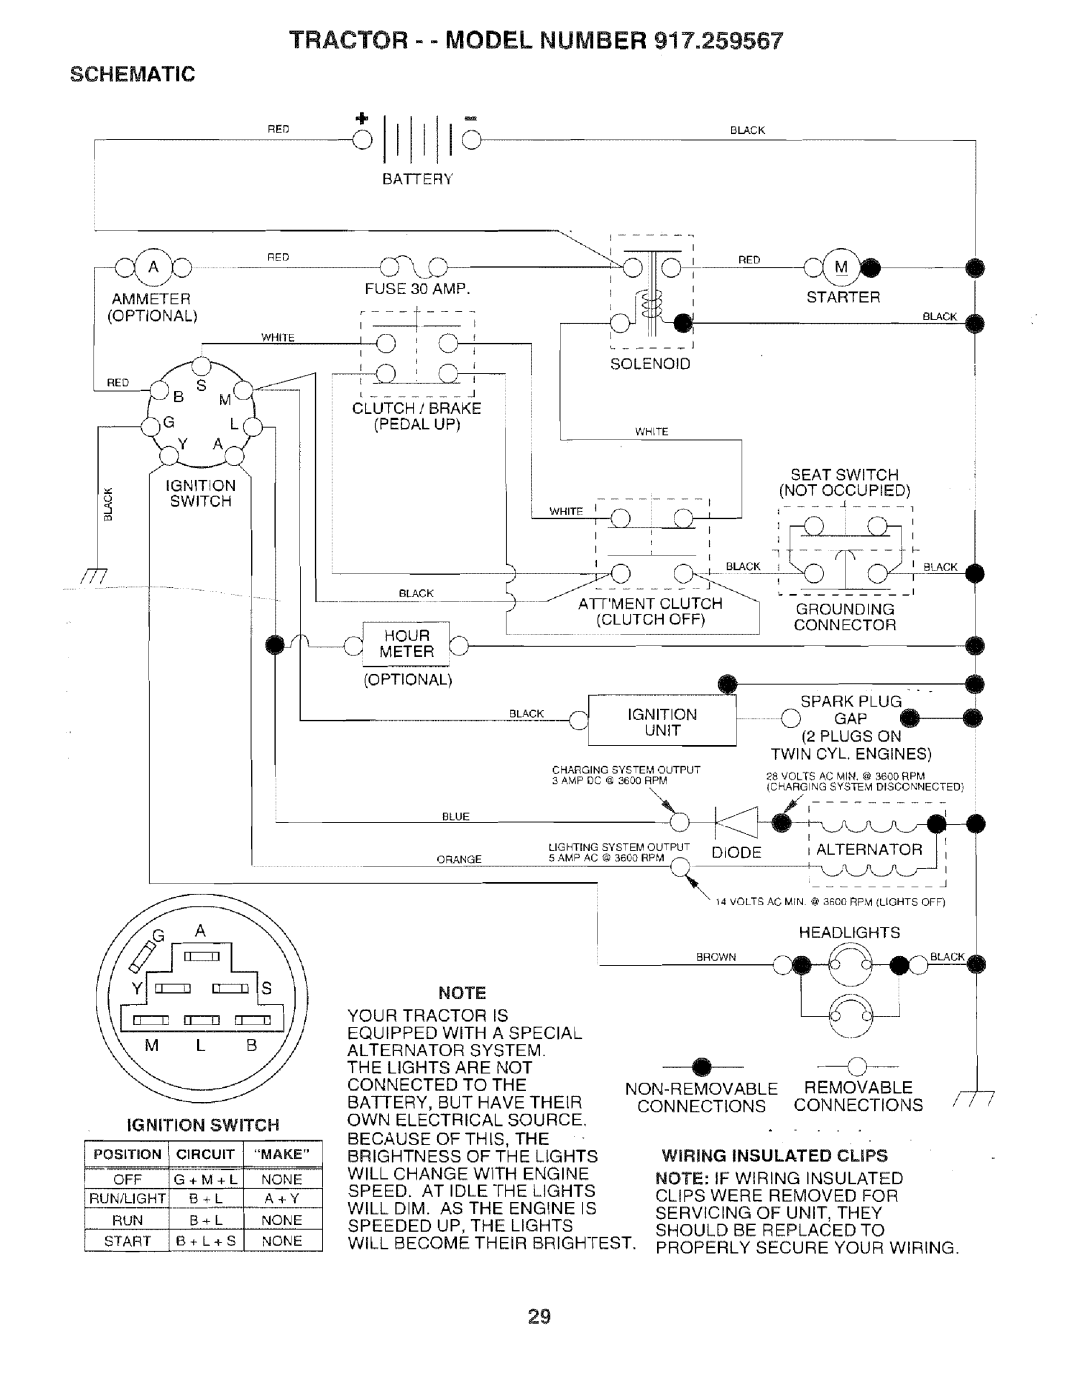 Sears 917.259567 owner manual Tractor - - Model Number, Schematic 